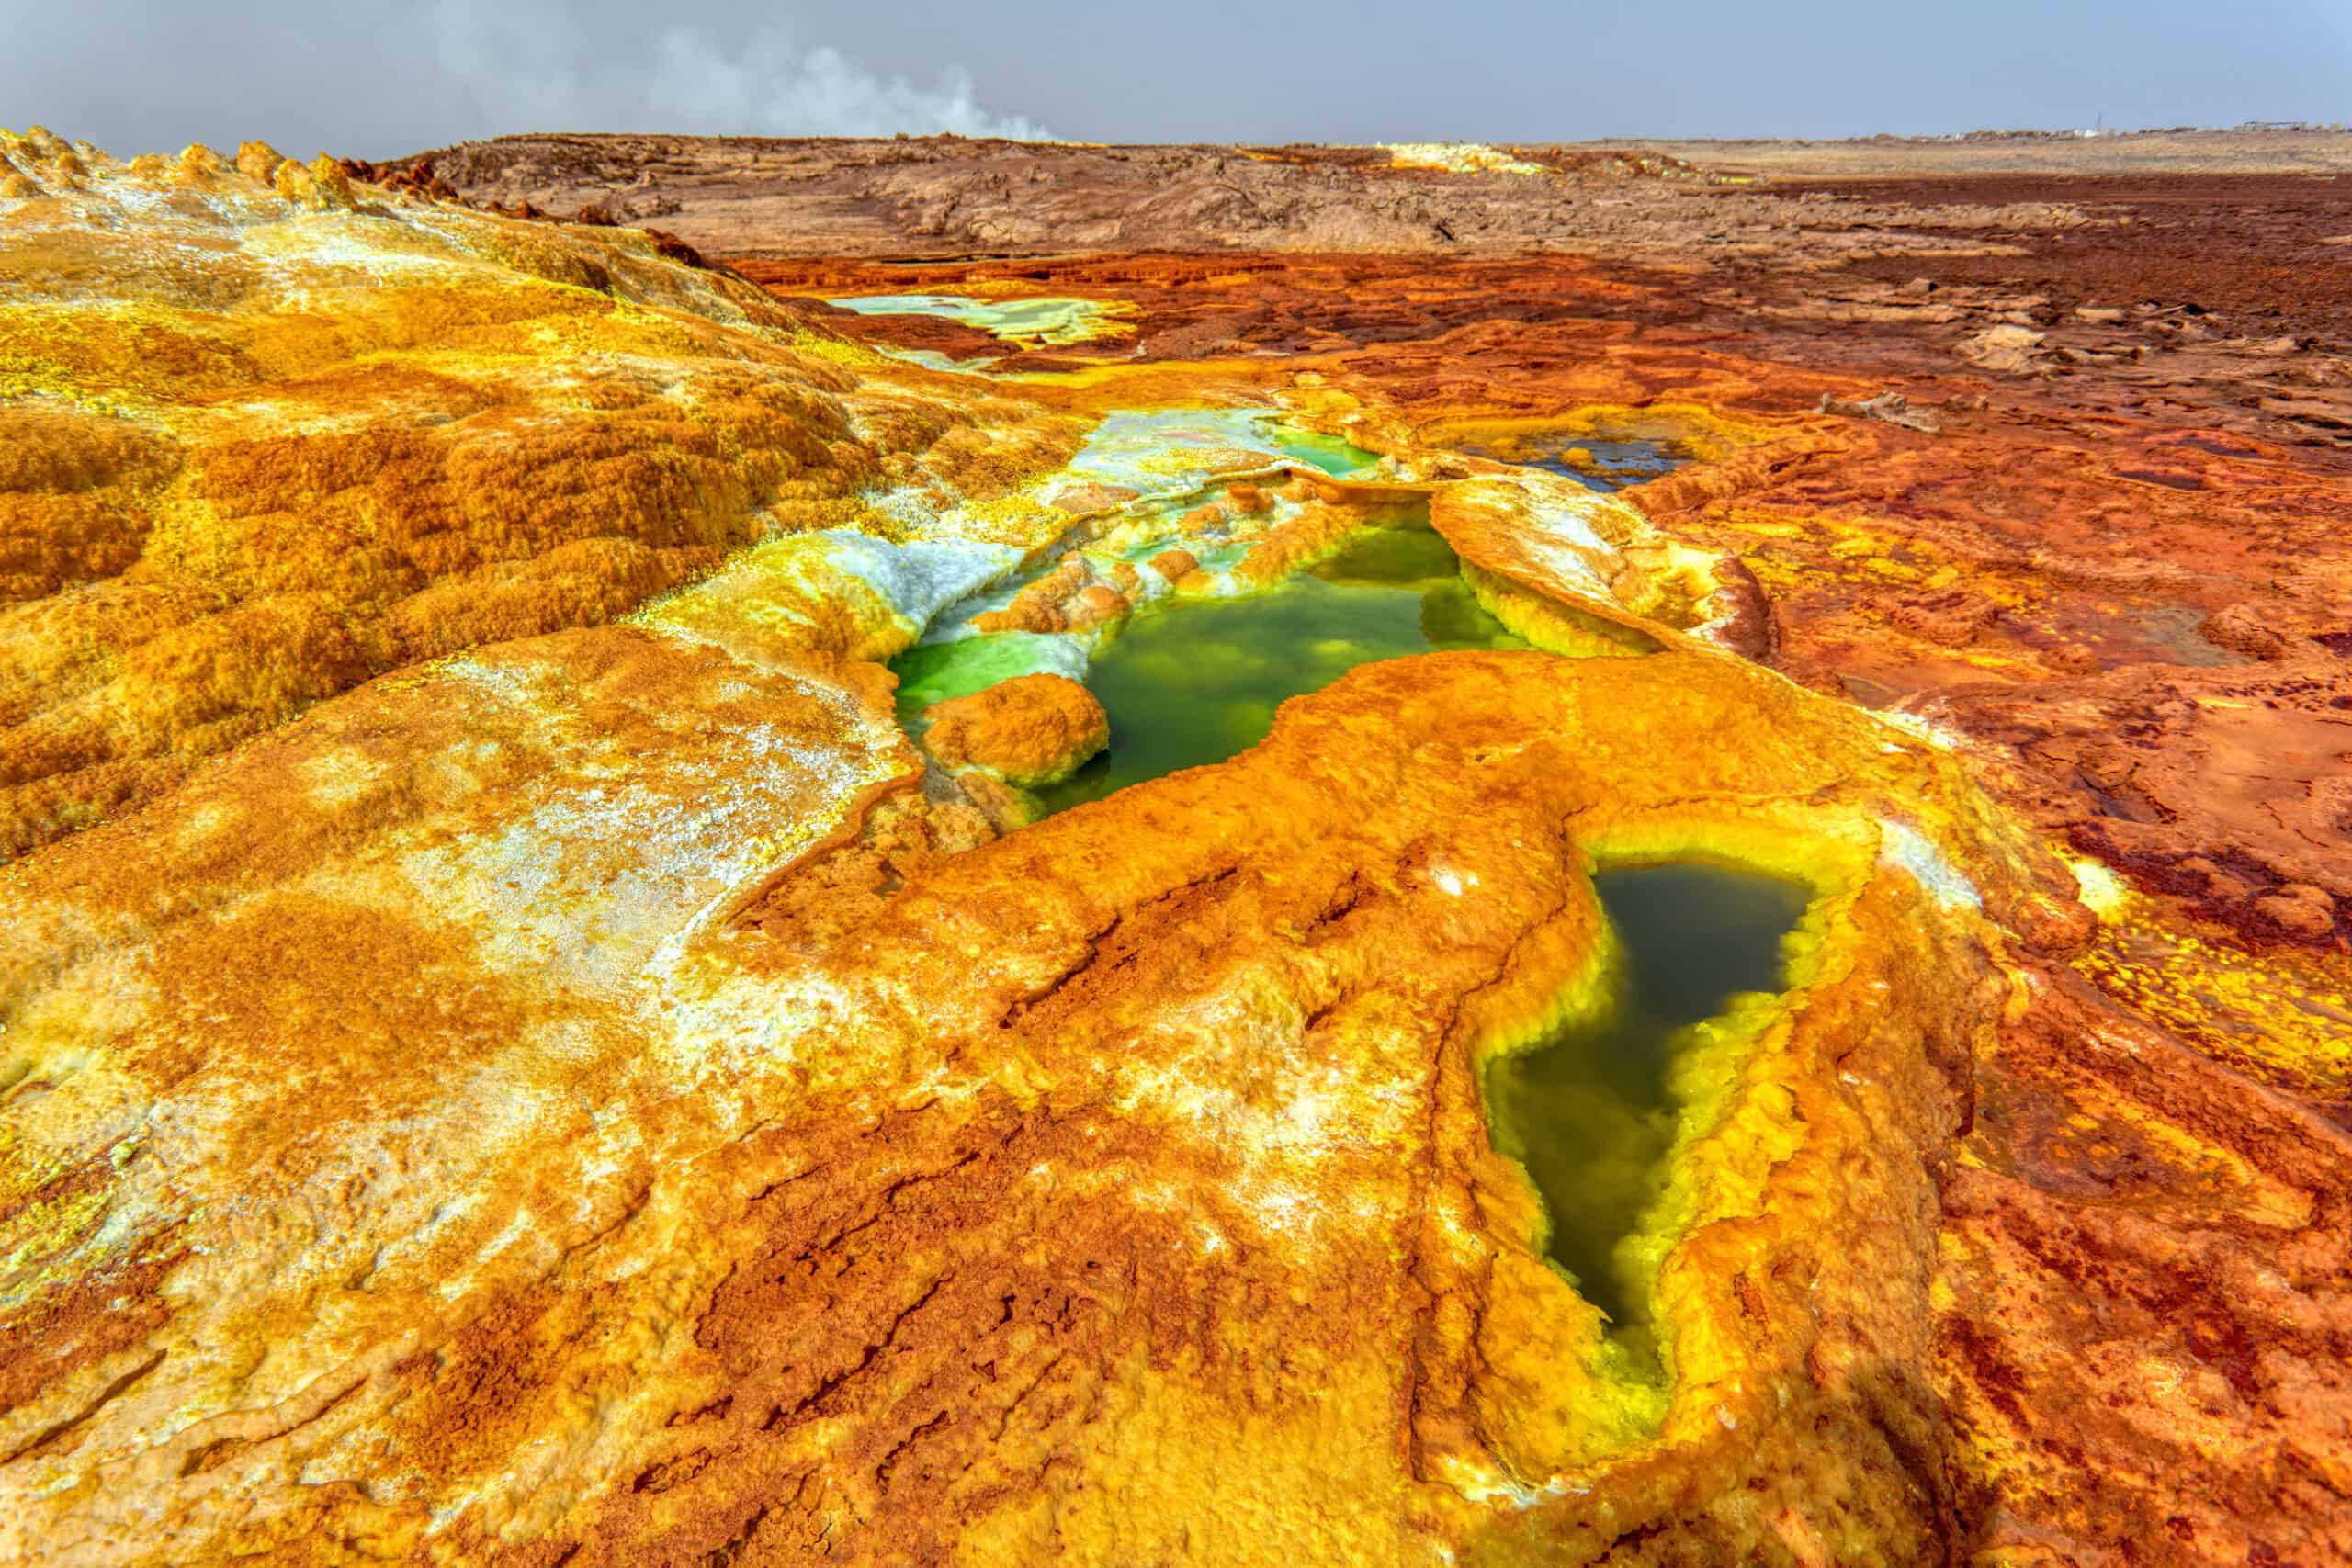 <p>Venture into the extreme environs of the Danakil Depression in Ethiopia, a place where the Earth’s raw power is on full display, creating a canvas of otherworldly landscapes. Approximately 410 feet below sea level, this plain is a geological wonder formed by the divergence of three tectonic plates, hinting at a future ocean as Africa slowly parts ways with the Horn. </p> <p>While it’s a hotbed of scientific intrigue, having revealed the ancient Australopithecus fossil “Lucy,” the depression’s vividly colored hot springs and vast salt flats also make it a stunningly harsh yet beautiful spectacle. Though travelers should heed current advisories, the Danakil Depression stands as a testament to our planet’s dynamic past and transformative future.</p>